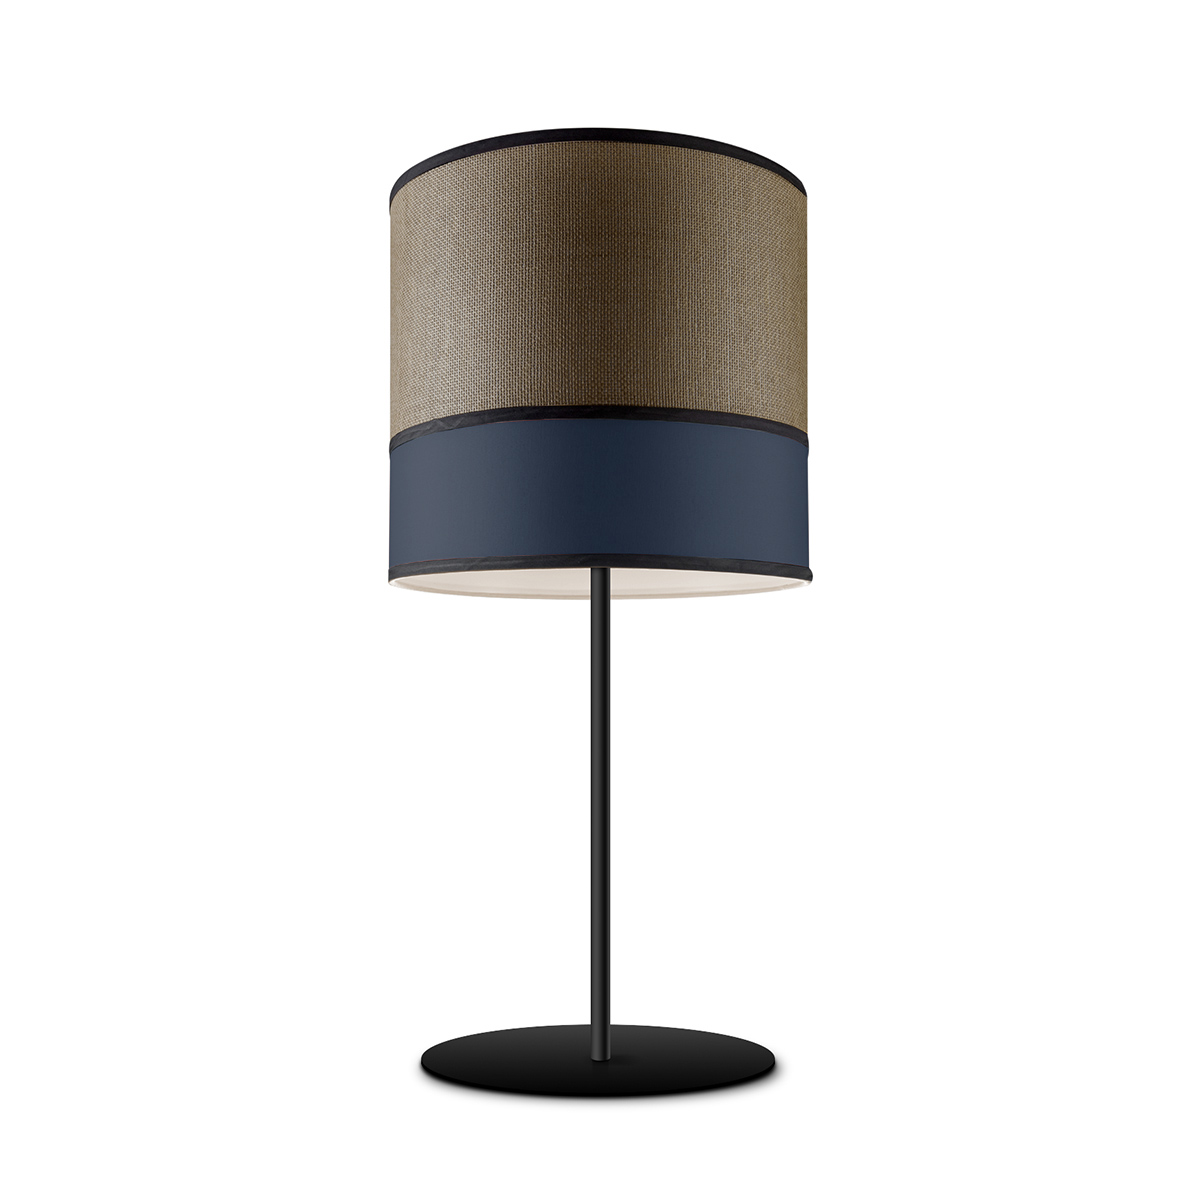 Tangla lighting - TLT7012-25BL - LED table lamp 1 Light - metal and paper and TC fabric in blue - night - E27